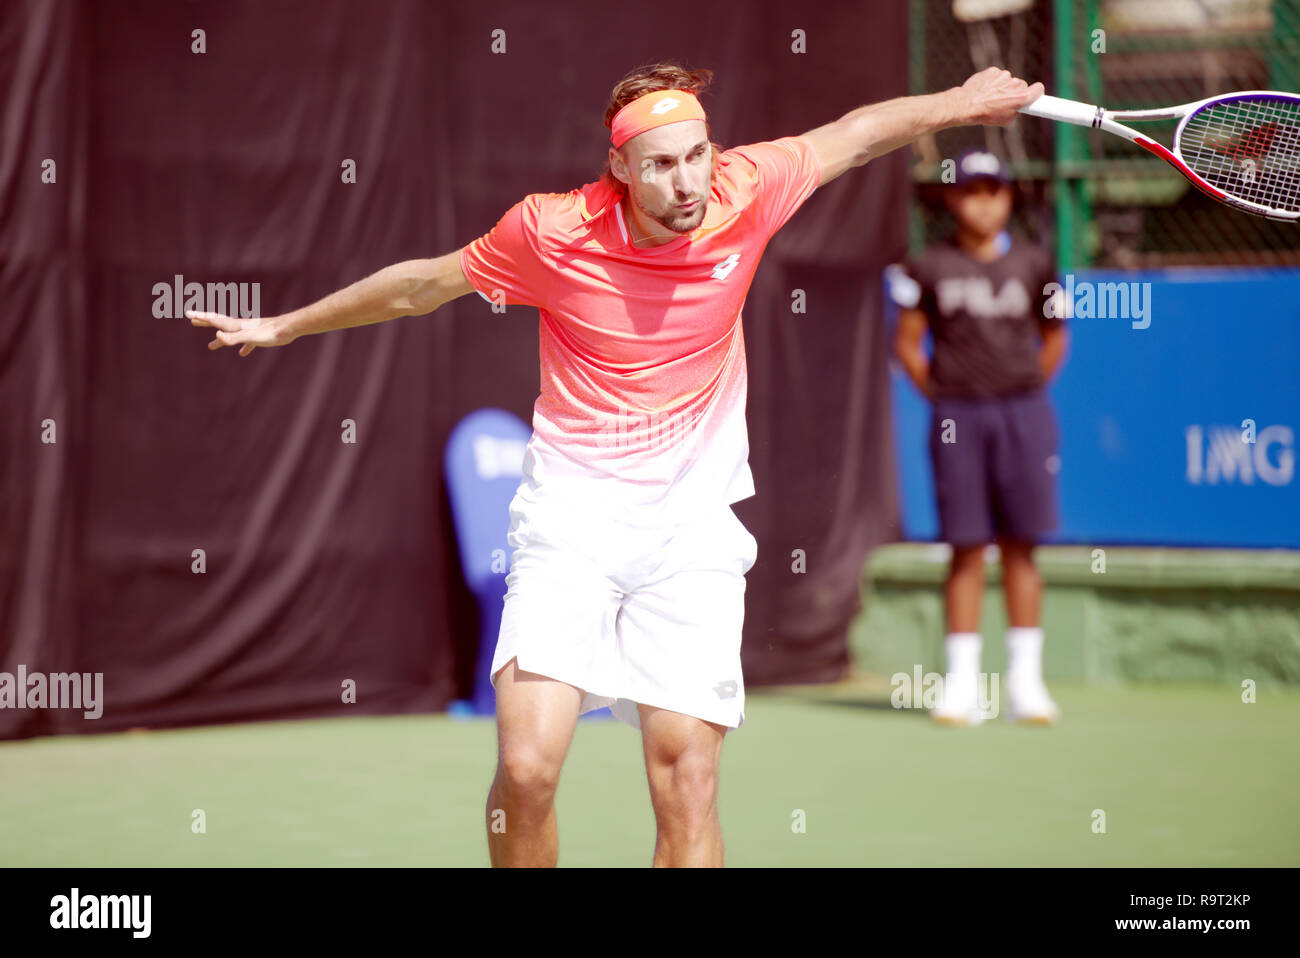 Pune, India. 29th December 2018. Ruben Bemelmans of Belgium in action in the first round of qualifying singles competition at Tata Open Maharashtra ATP Tennis tournament in Pune, India. Credit: Karunesh Johri/Alamy Live News Stock Photo